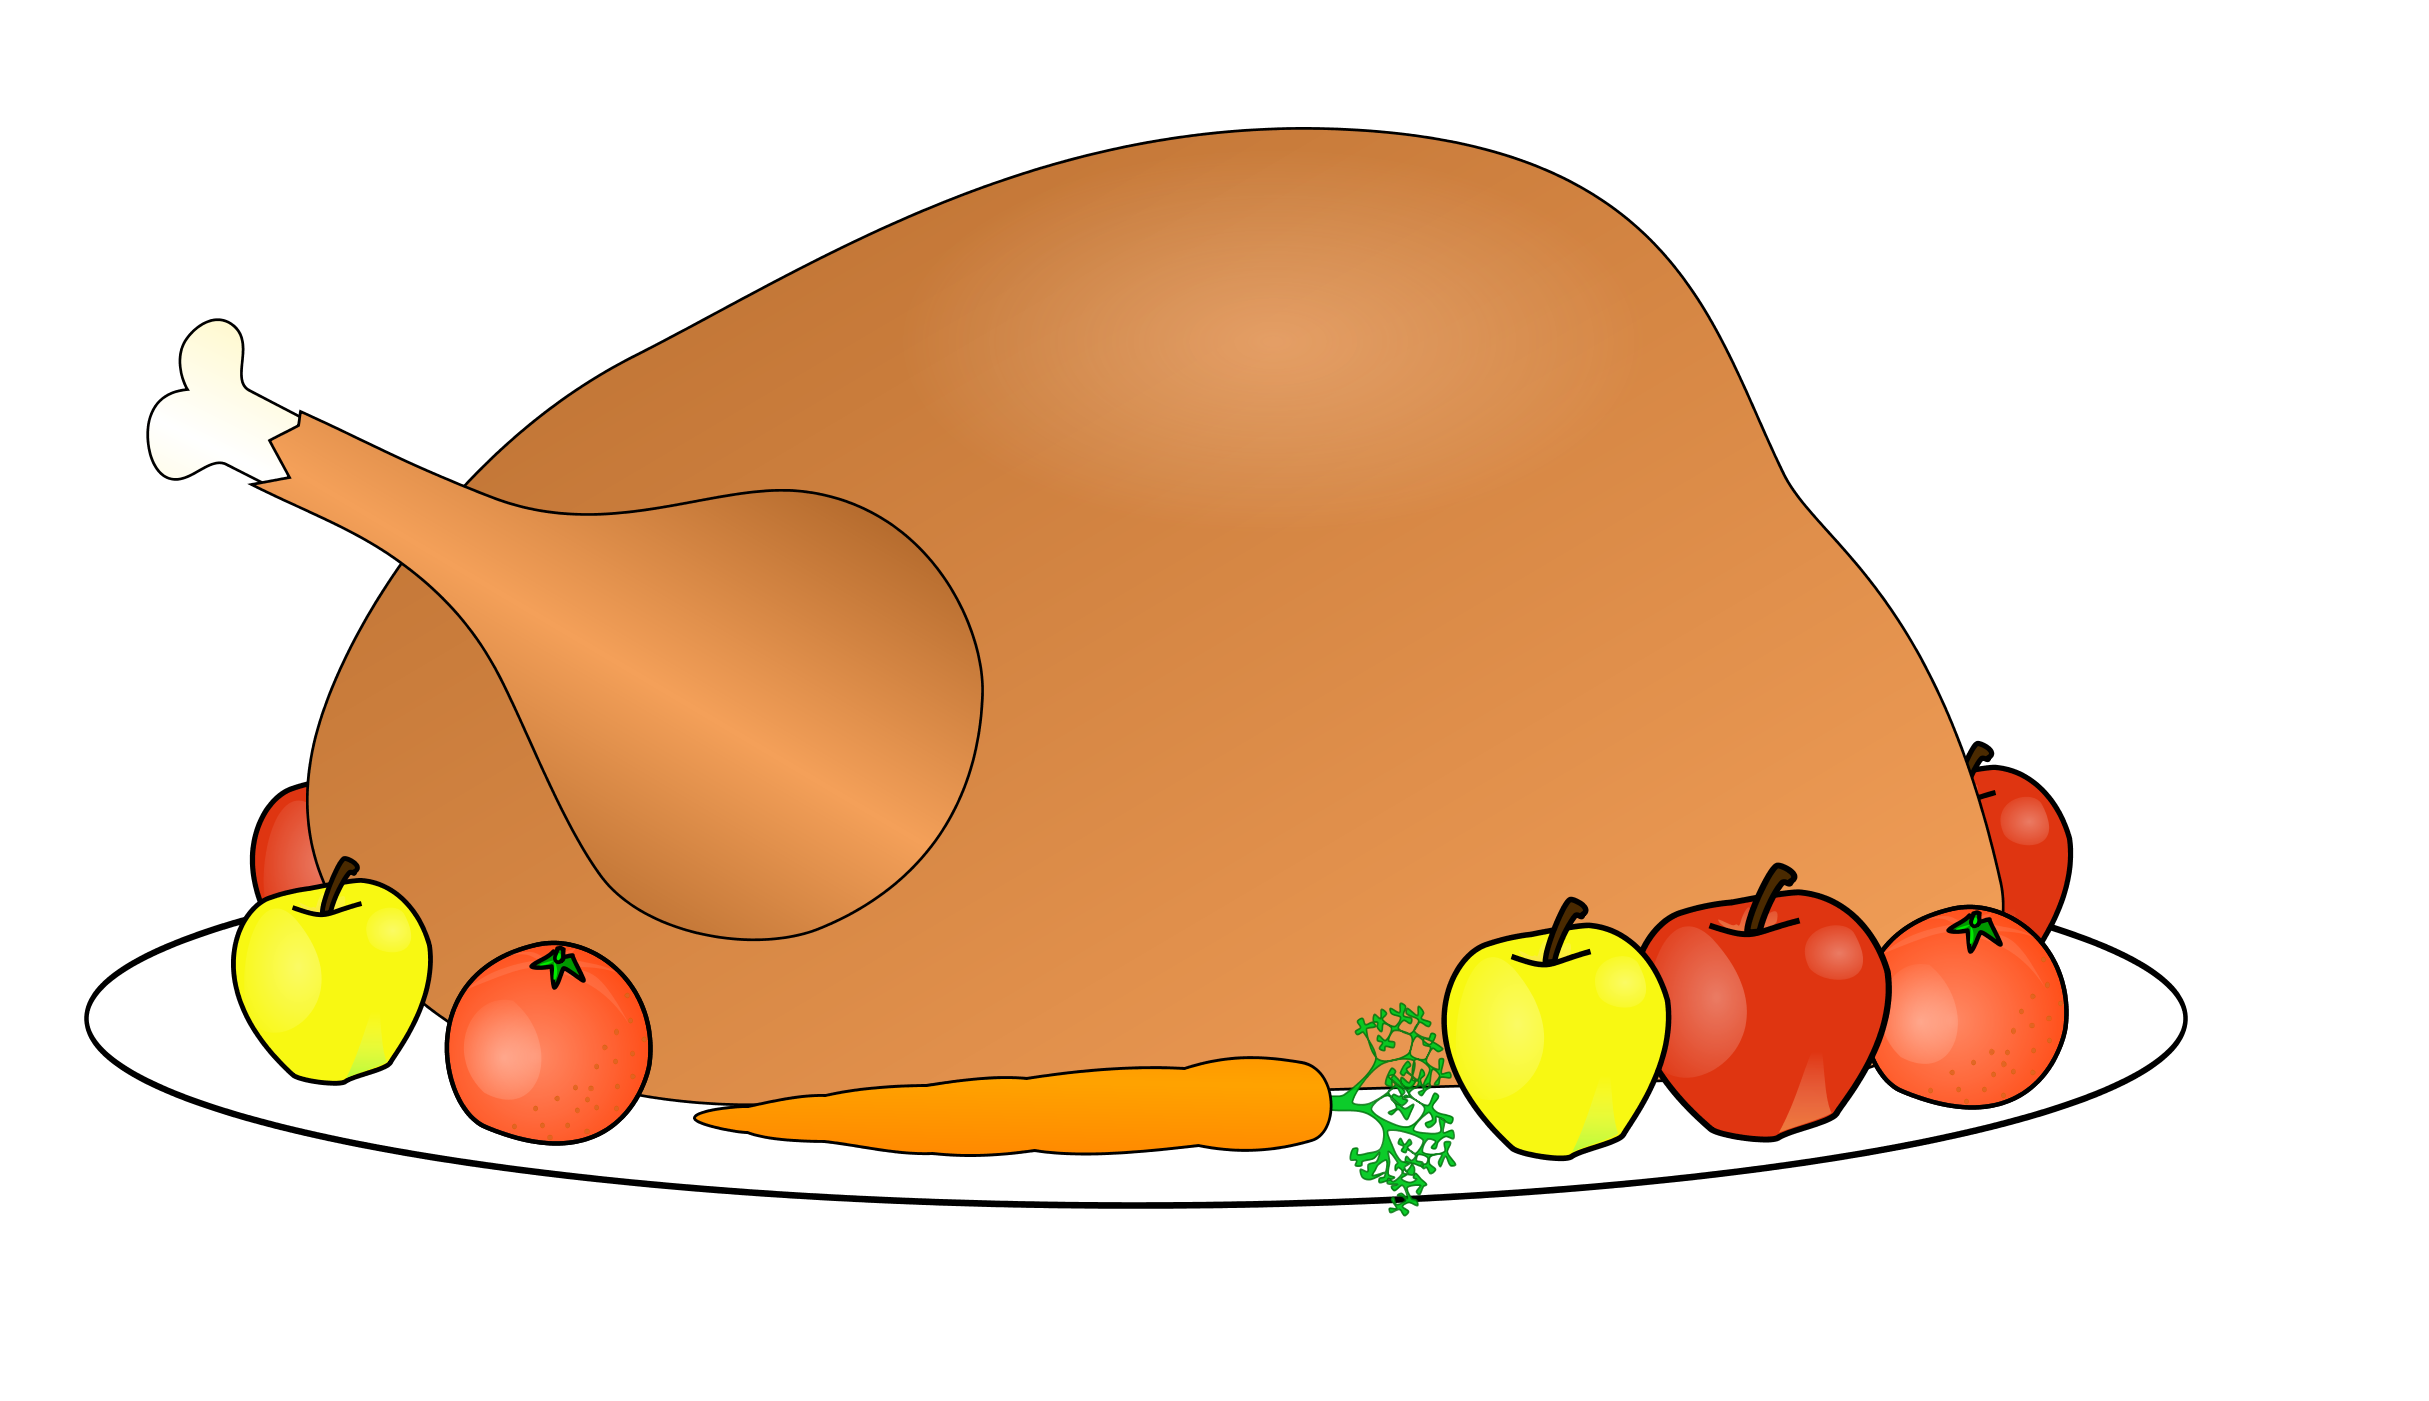 Free Clip Art Thanksgiving Animated | Clipart Panda - Free Clipart ...